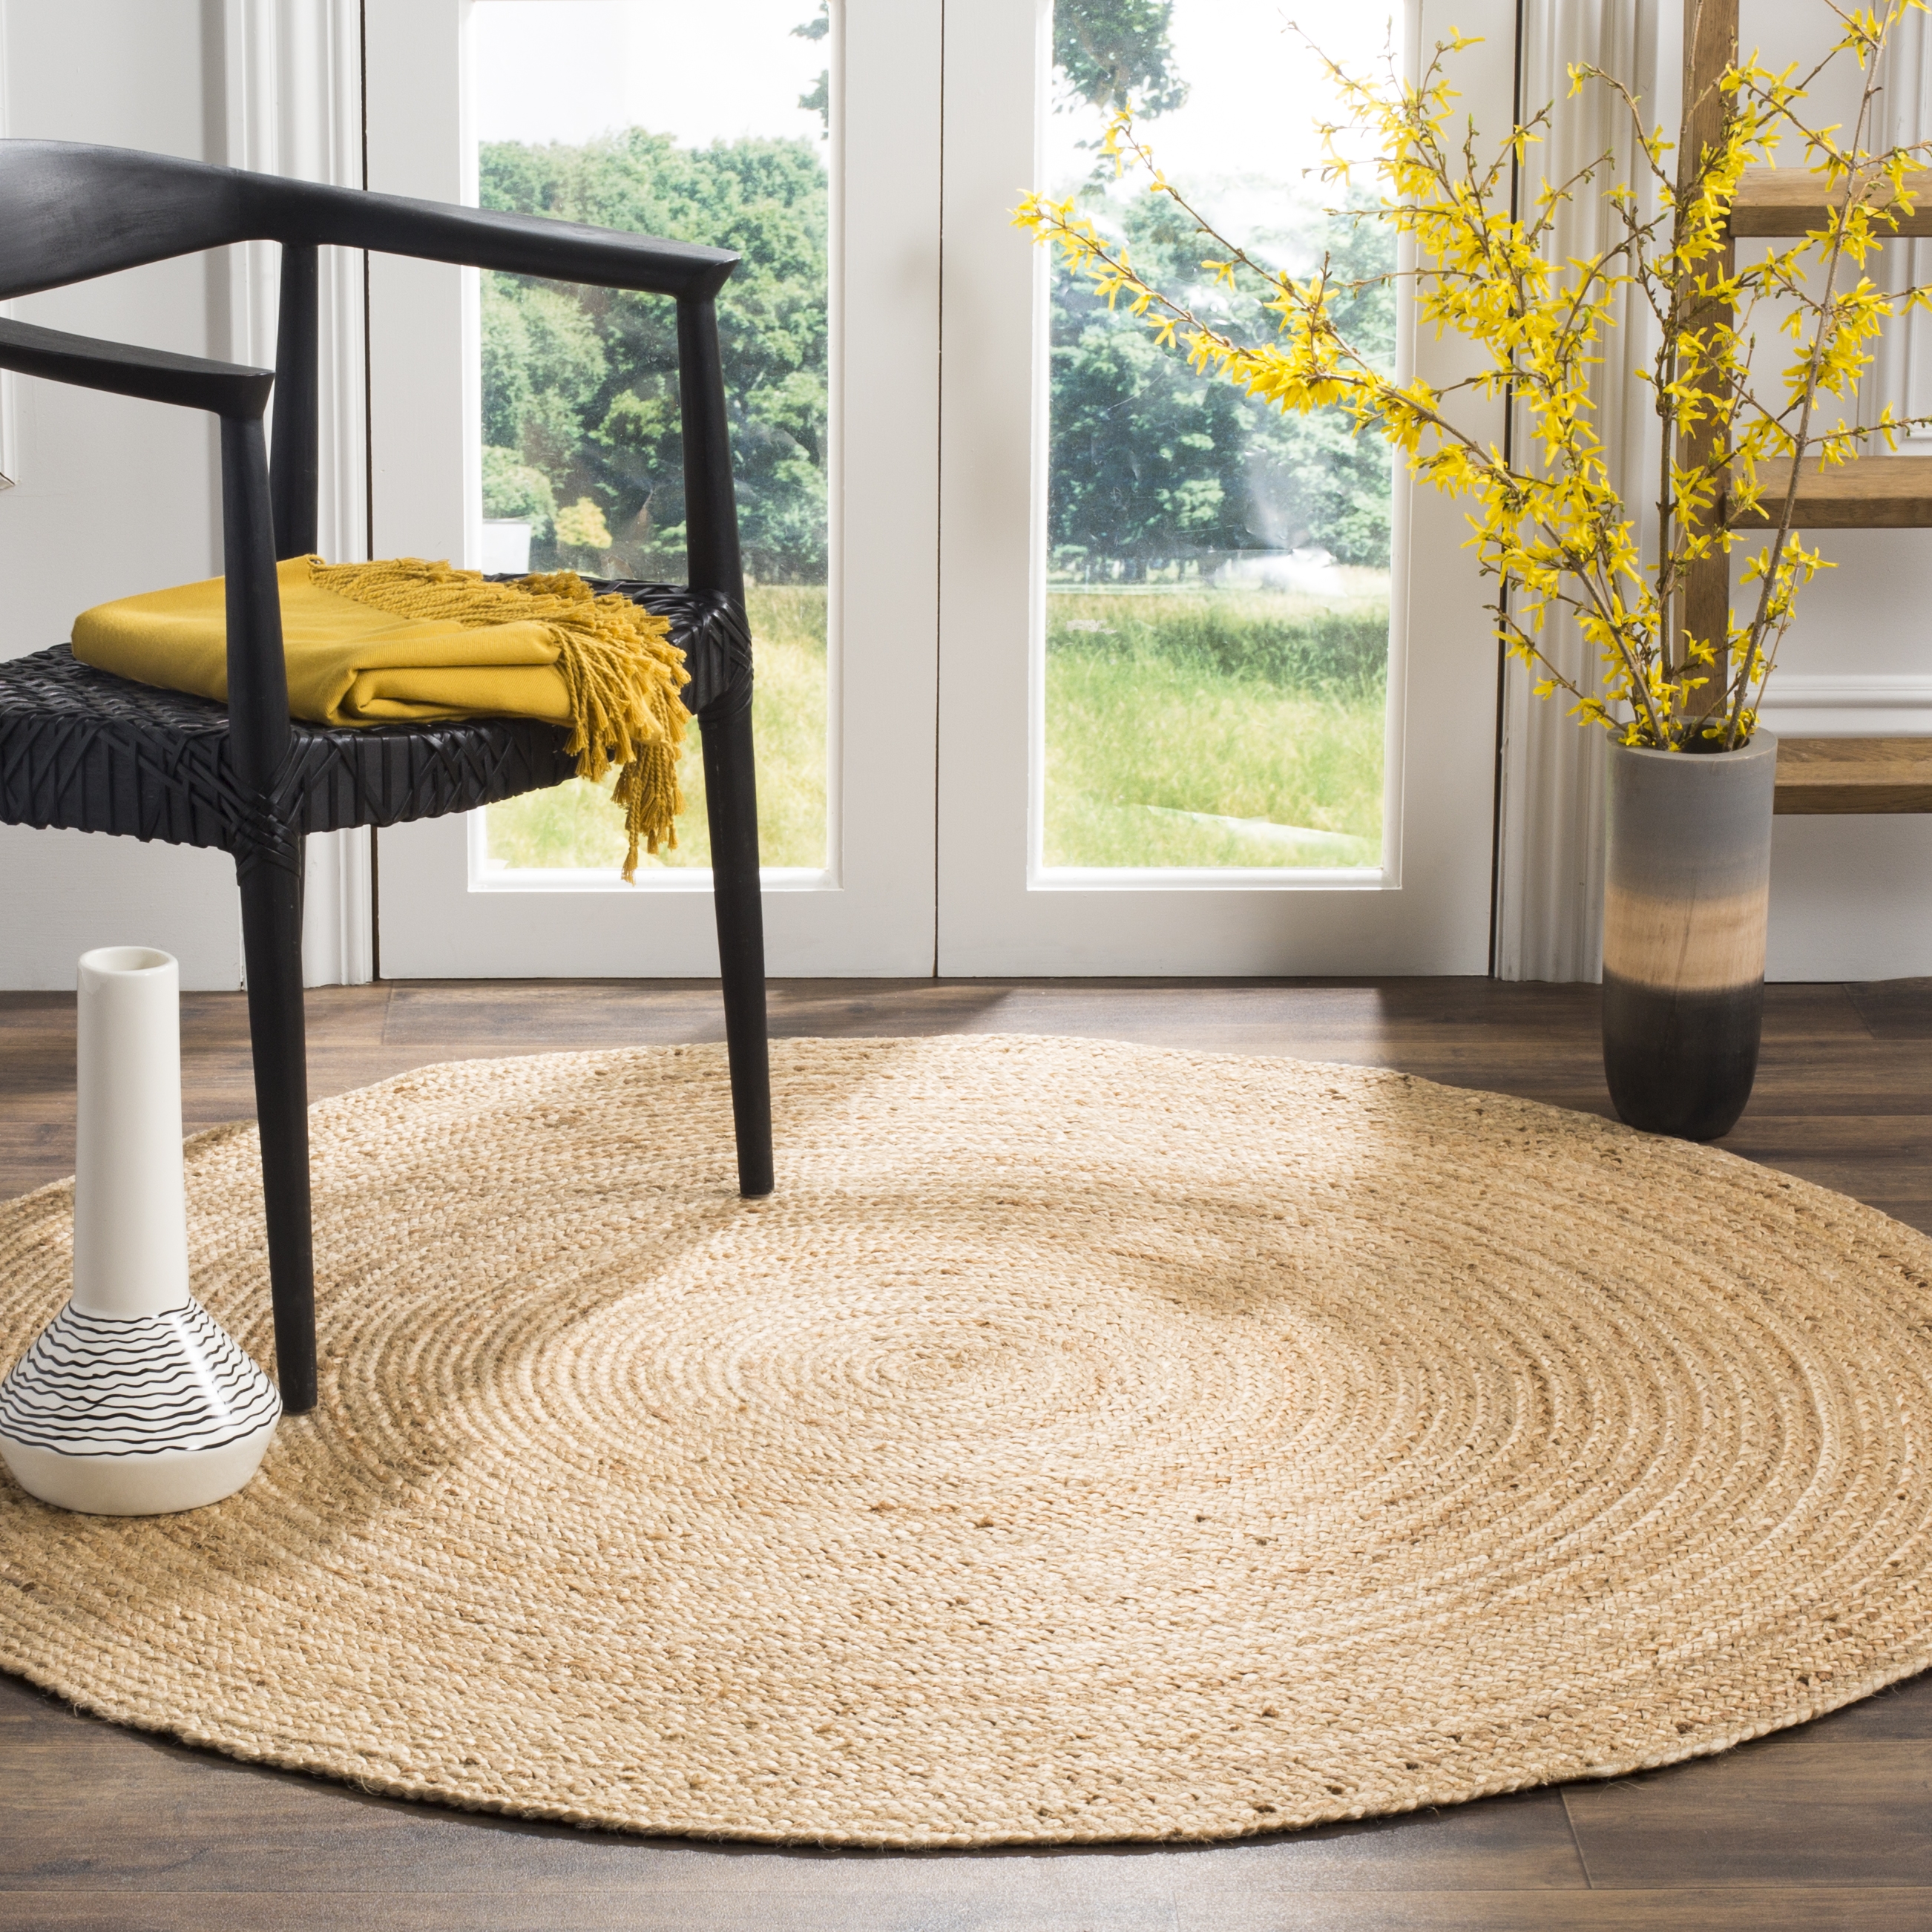 Arlo Home Hand Woven Area Rug, NF801N, Natural/Natural,  5' X 5' Round - Image 1